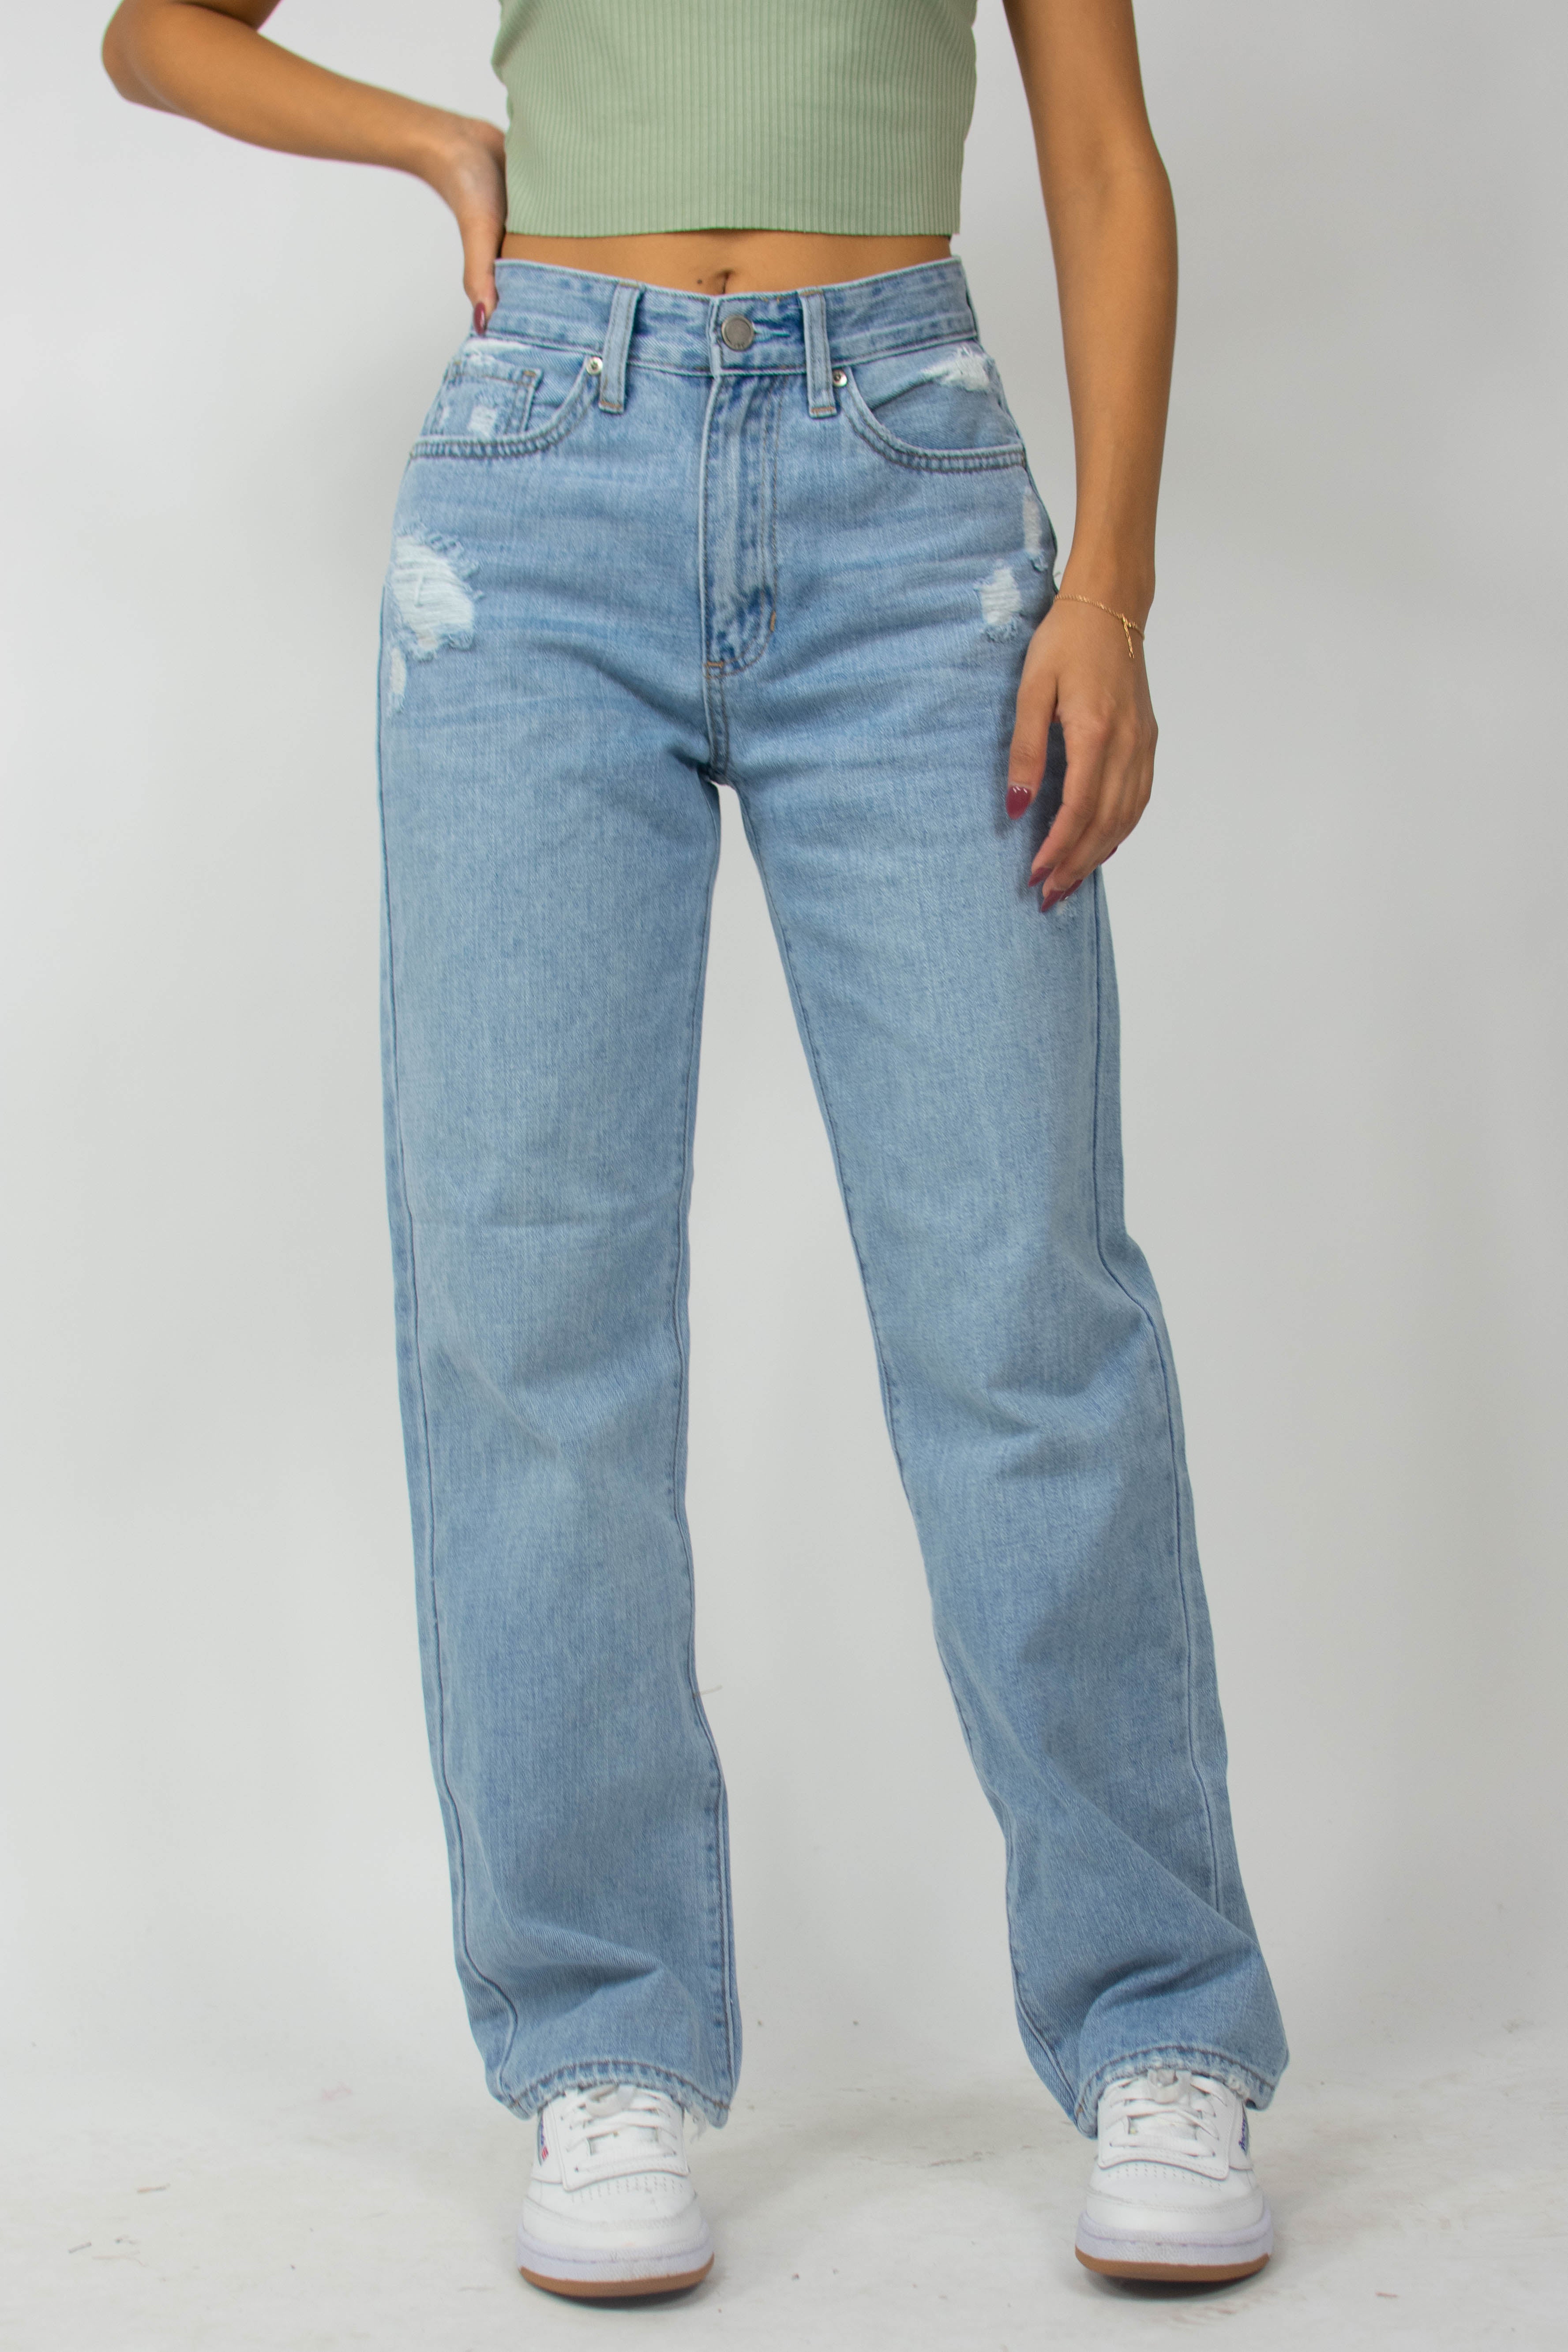 Tanner Jeans in Light Wash